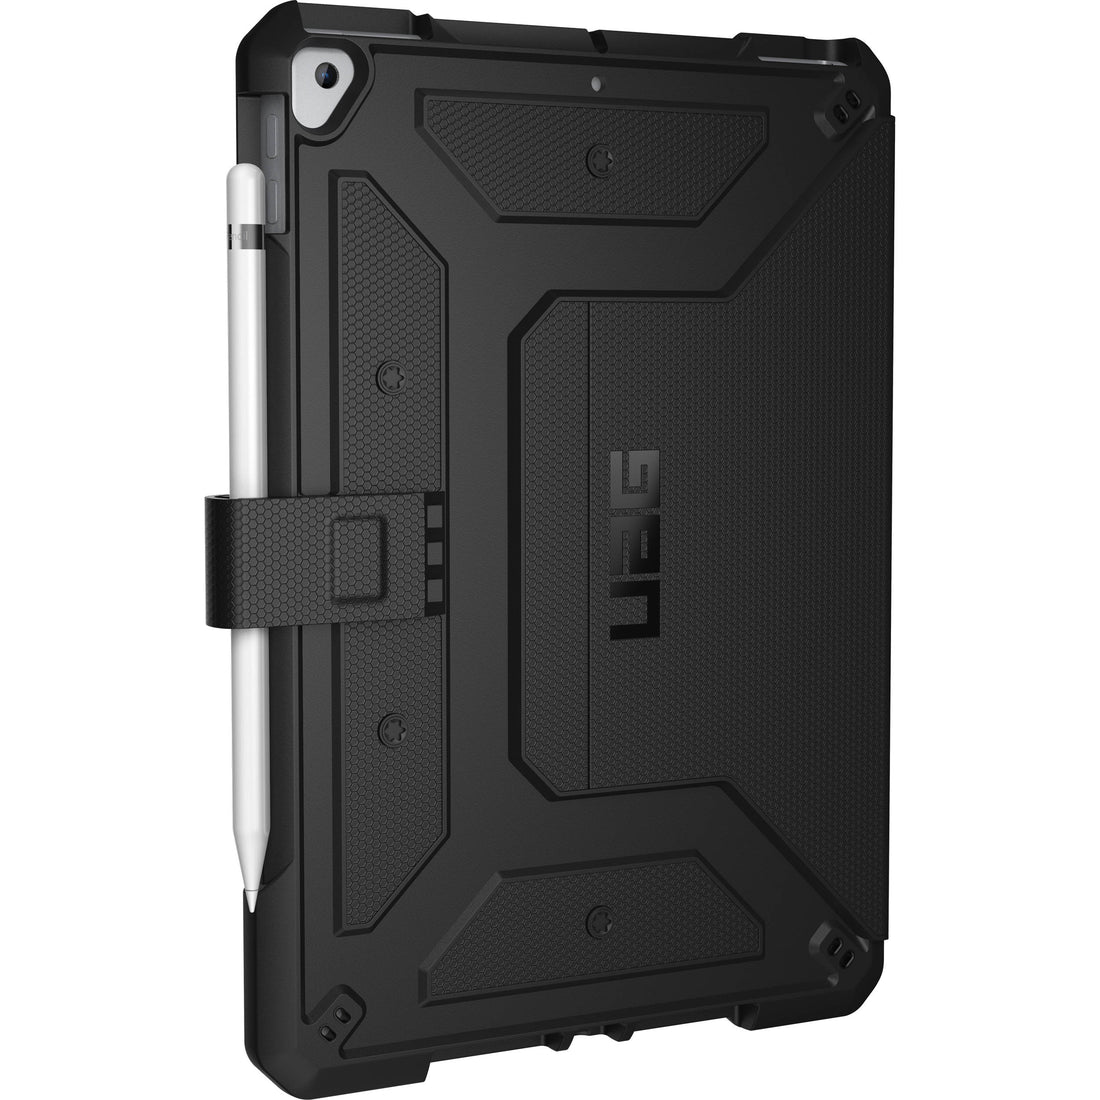 Review UAG Metropolis Case for iPad 7th Gen 10.2 inch [Comparision with iPad Pro 11]